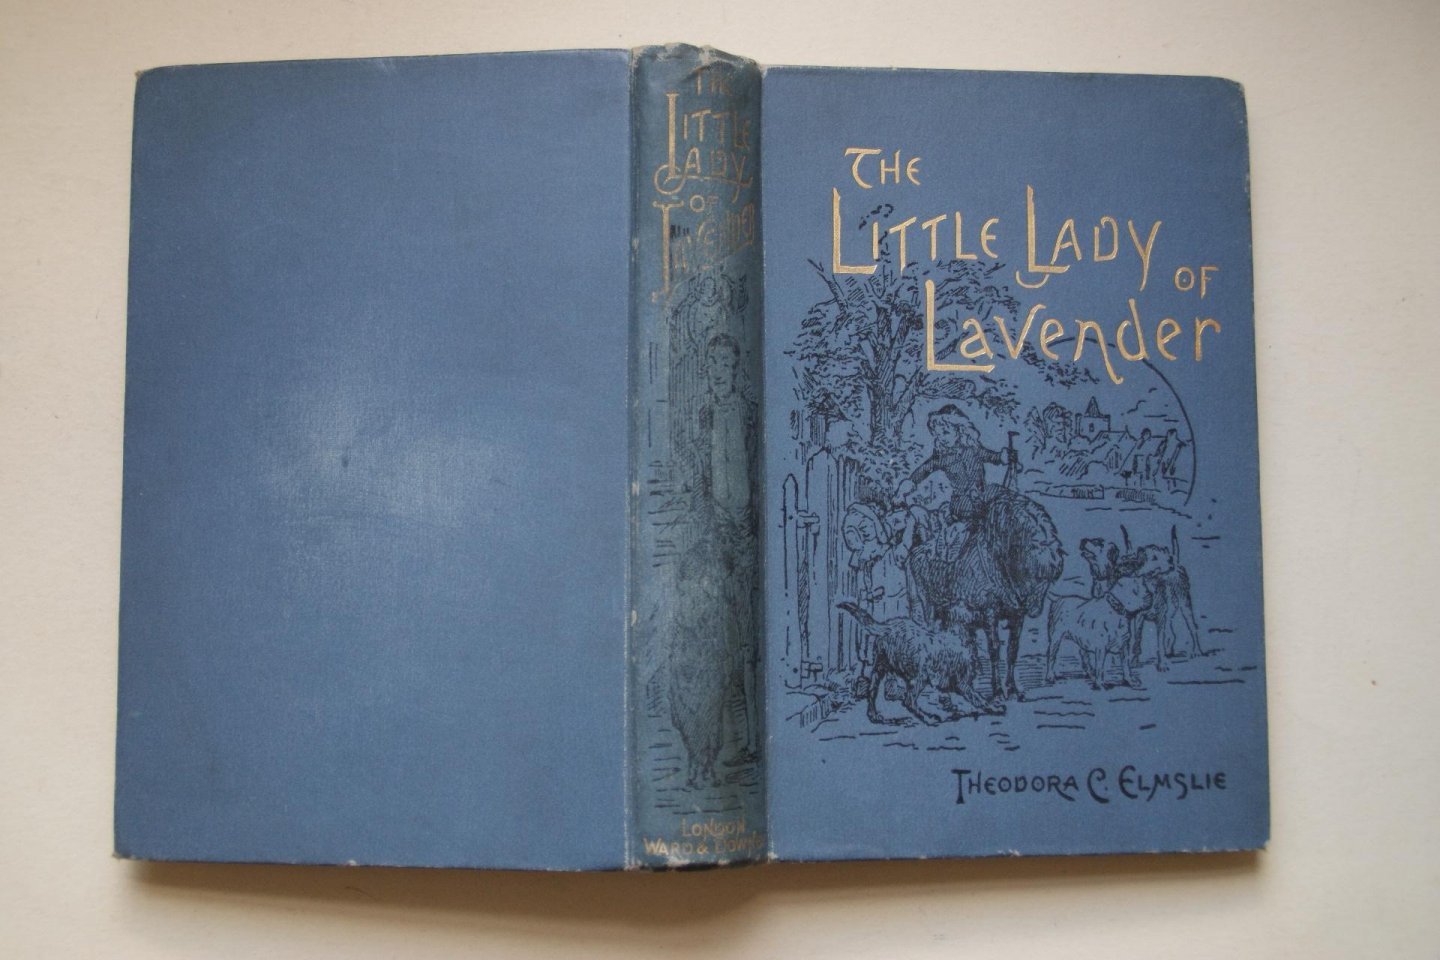 Elmsly, Theodora C. - The Little Lady Of Lavender  Illustrated by Edith Scannell  & H.L.E.